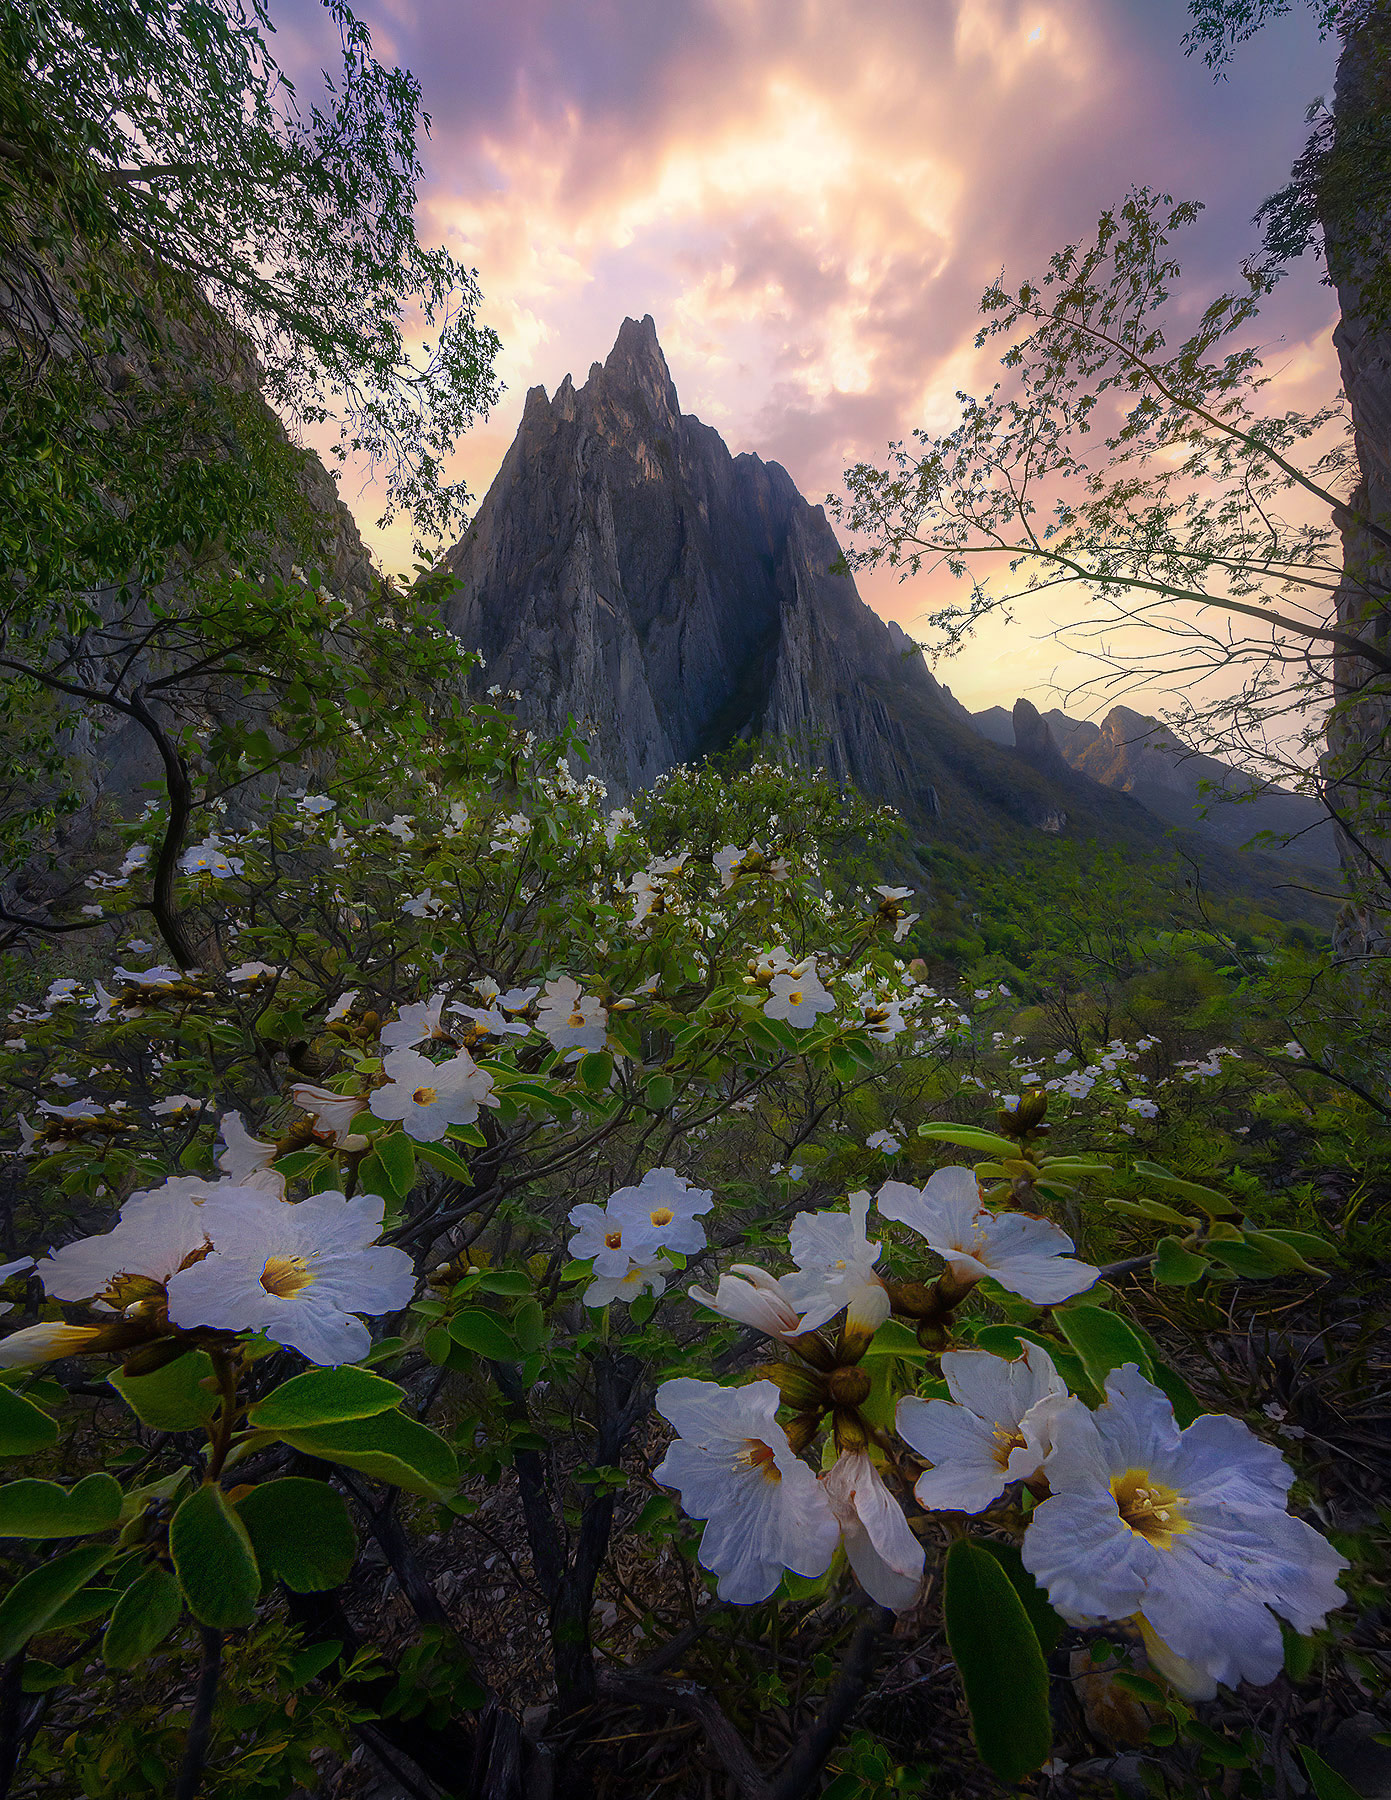 Mexican Olive trees in bloom adorn these steep walled canyons famous with climbers from around the world in Potrero Chico, Mexico...